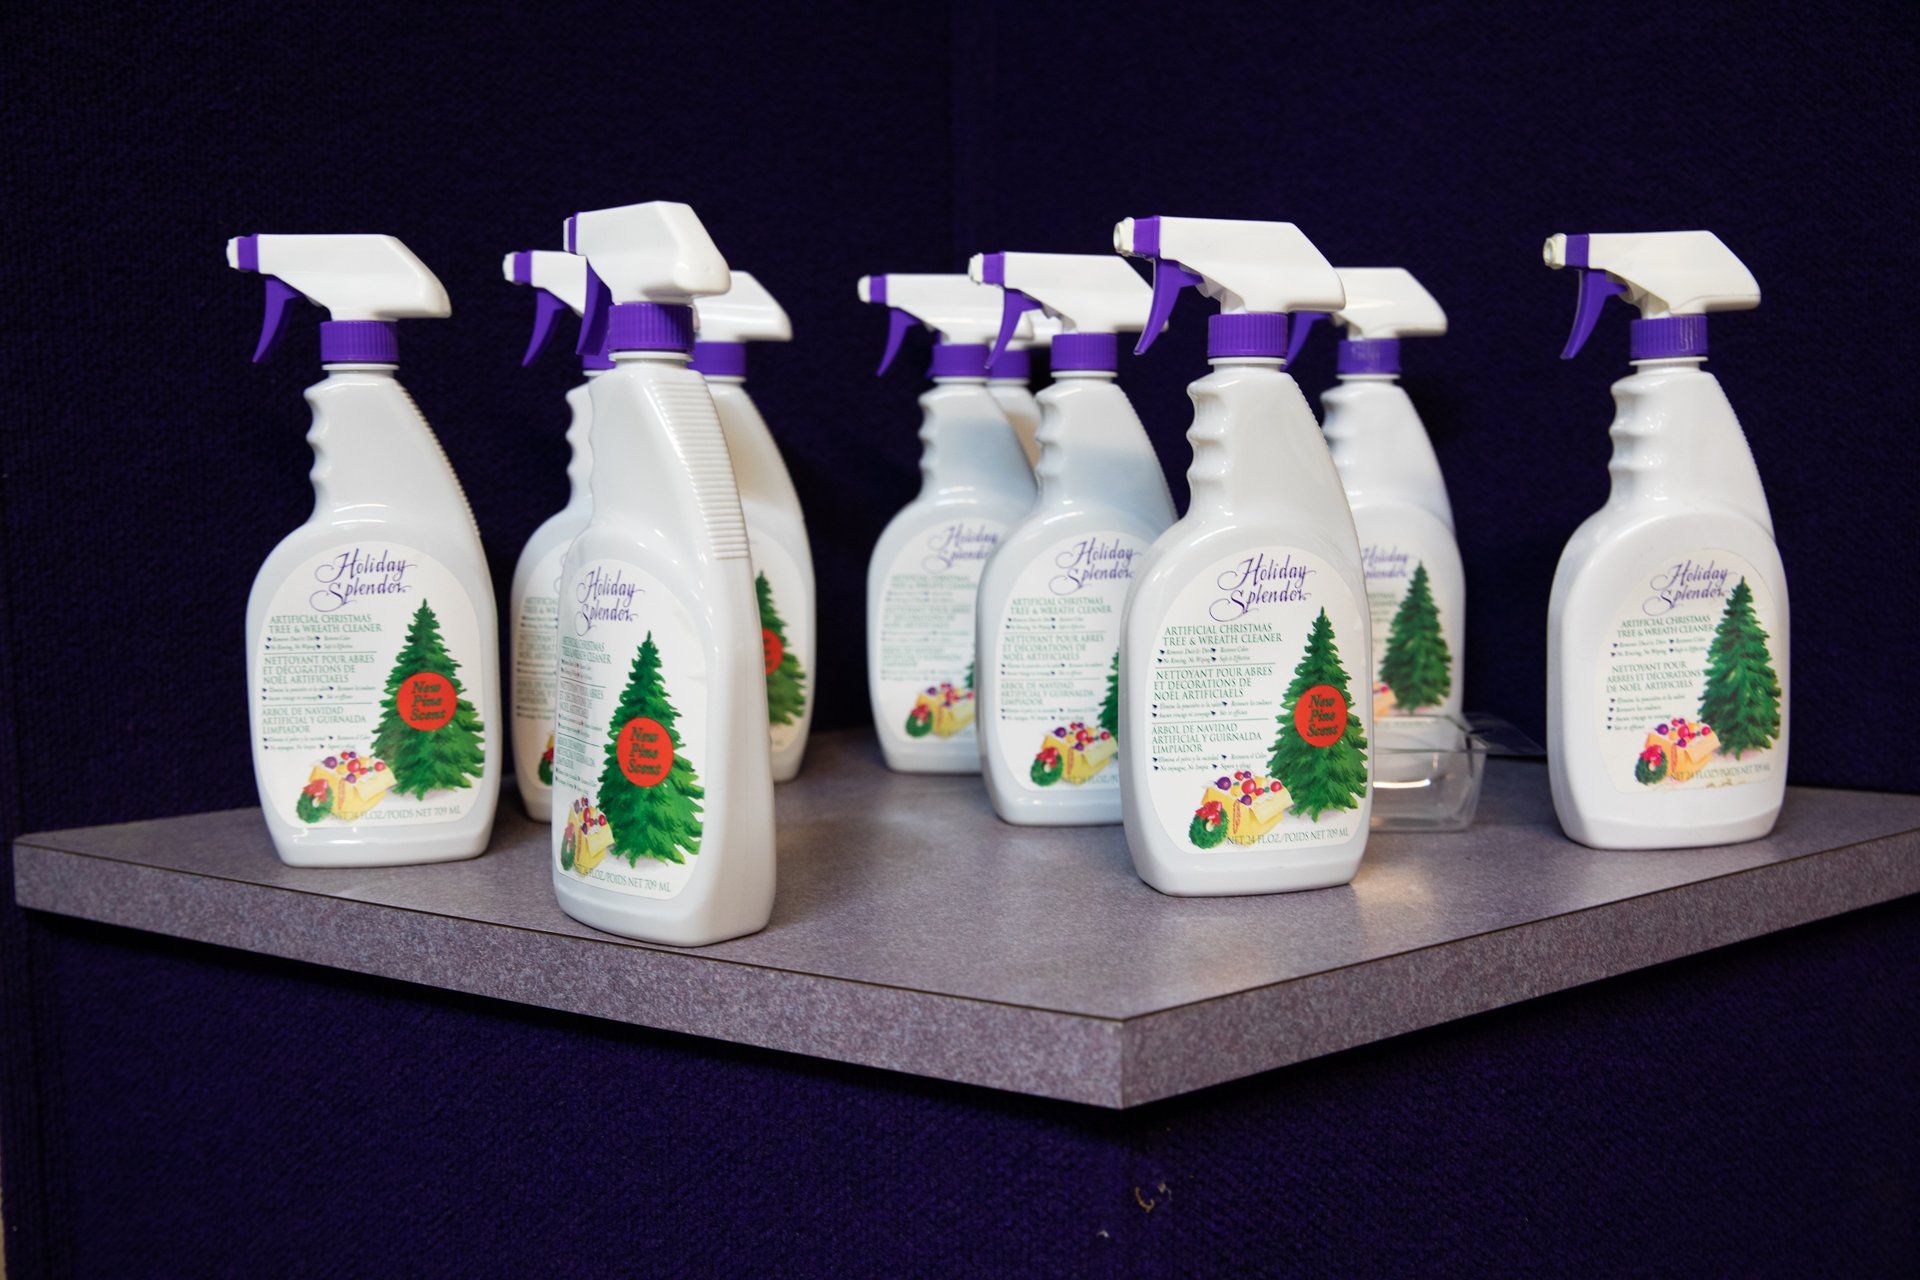 A row of spray bottles with christmas trees on them